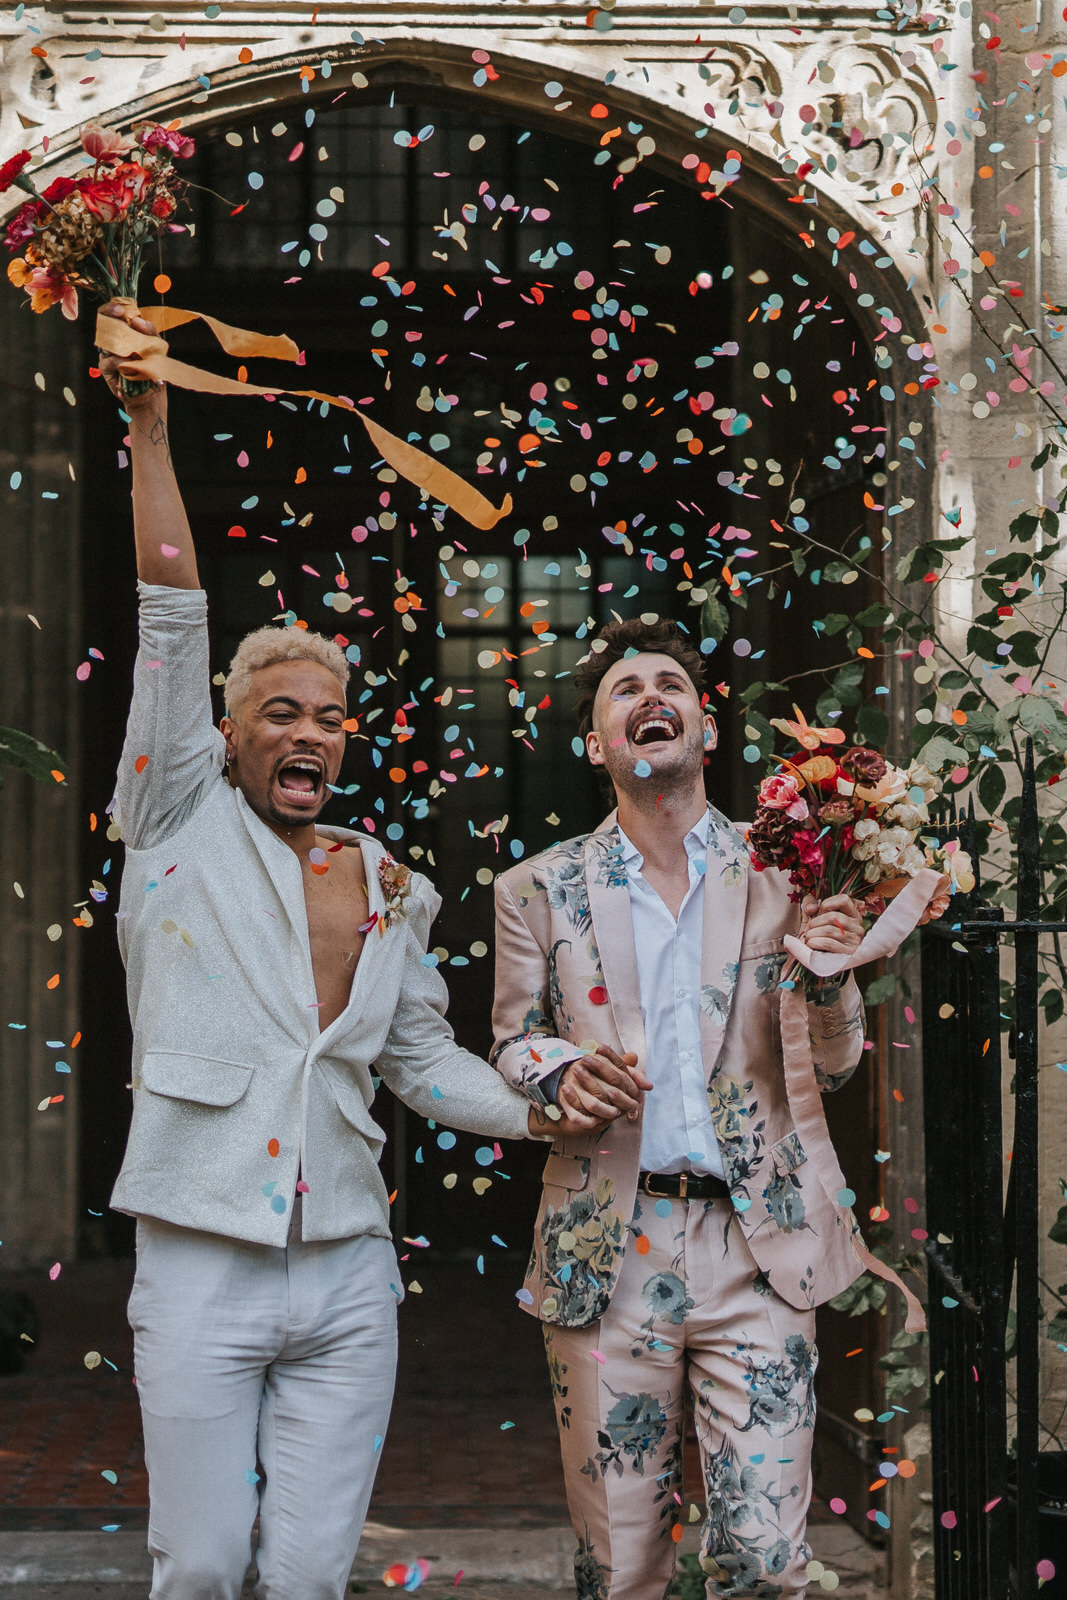 Two men getting married and walking through confetti